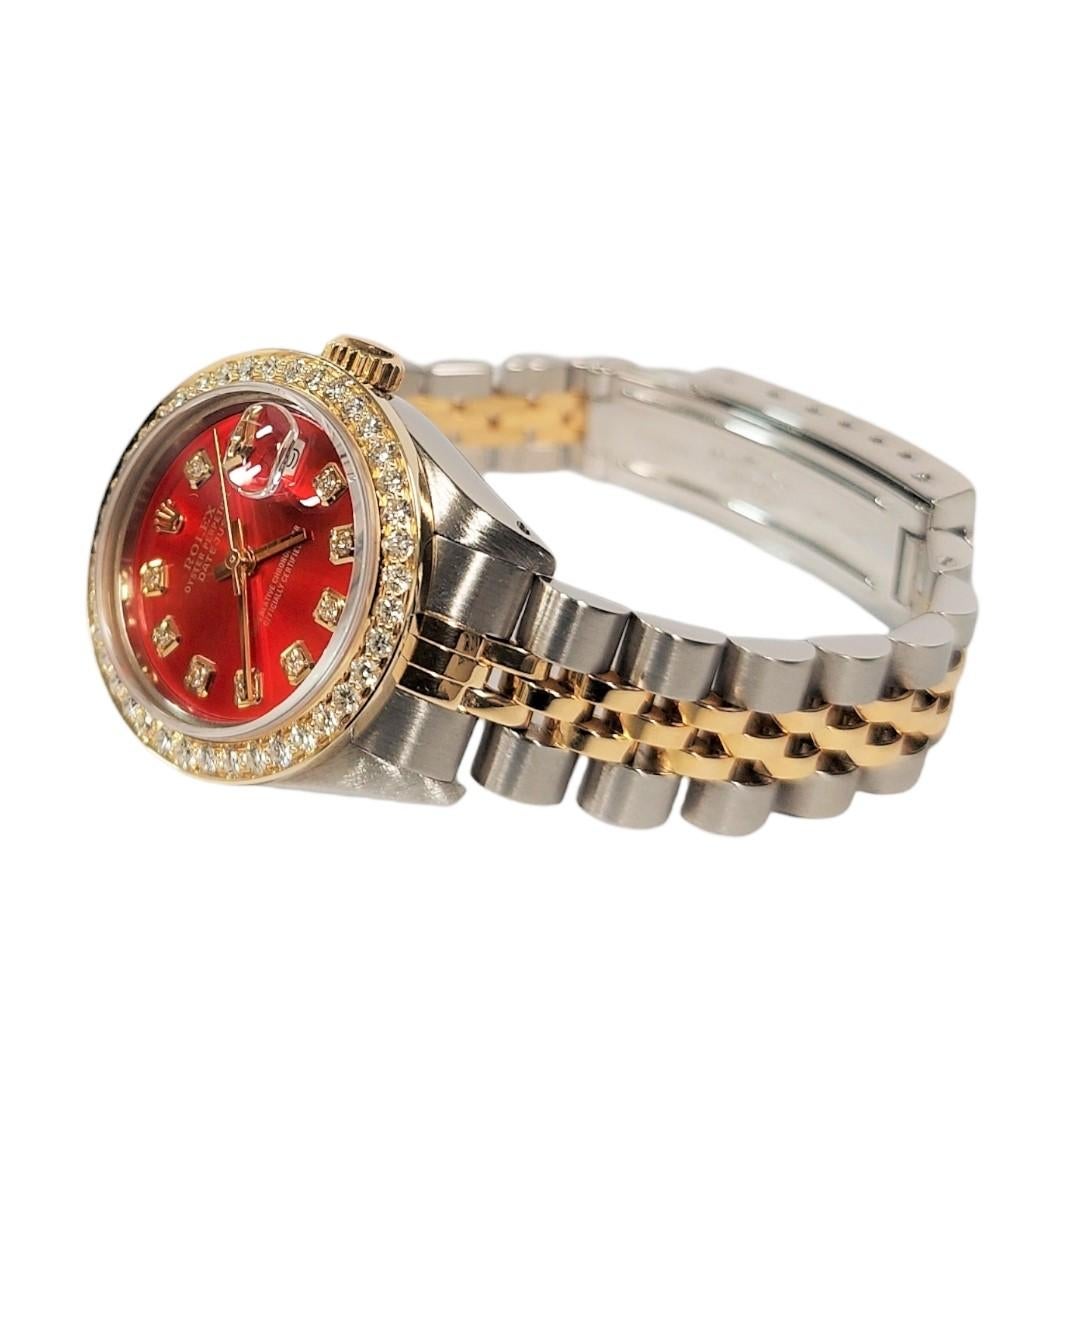 (Watch Description)
Brand - Rolex
Gender - Ladies
Model - 6917 Datejust
Metals - Yellow Gold / Steel 
Case size - 26mm
Bezel -Yellow Gold Fluted
Crystal - Sapphire
Movement - Automatic caliber 2030
Dial - Refinished Red Diamond
Wrist band - Two